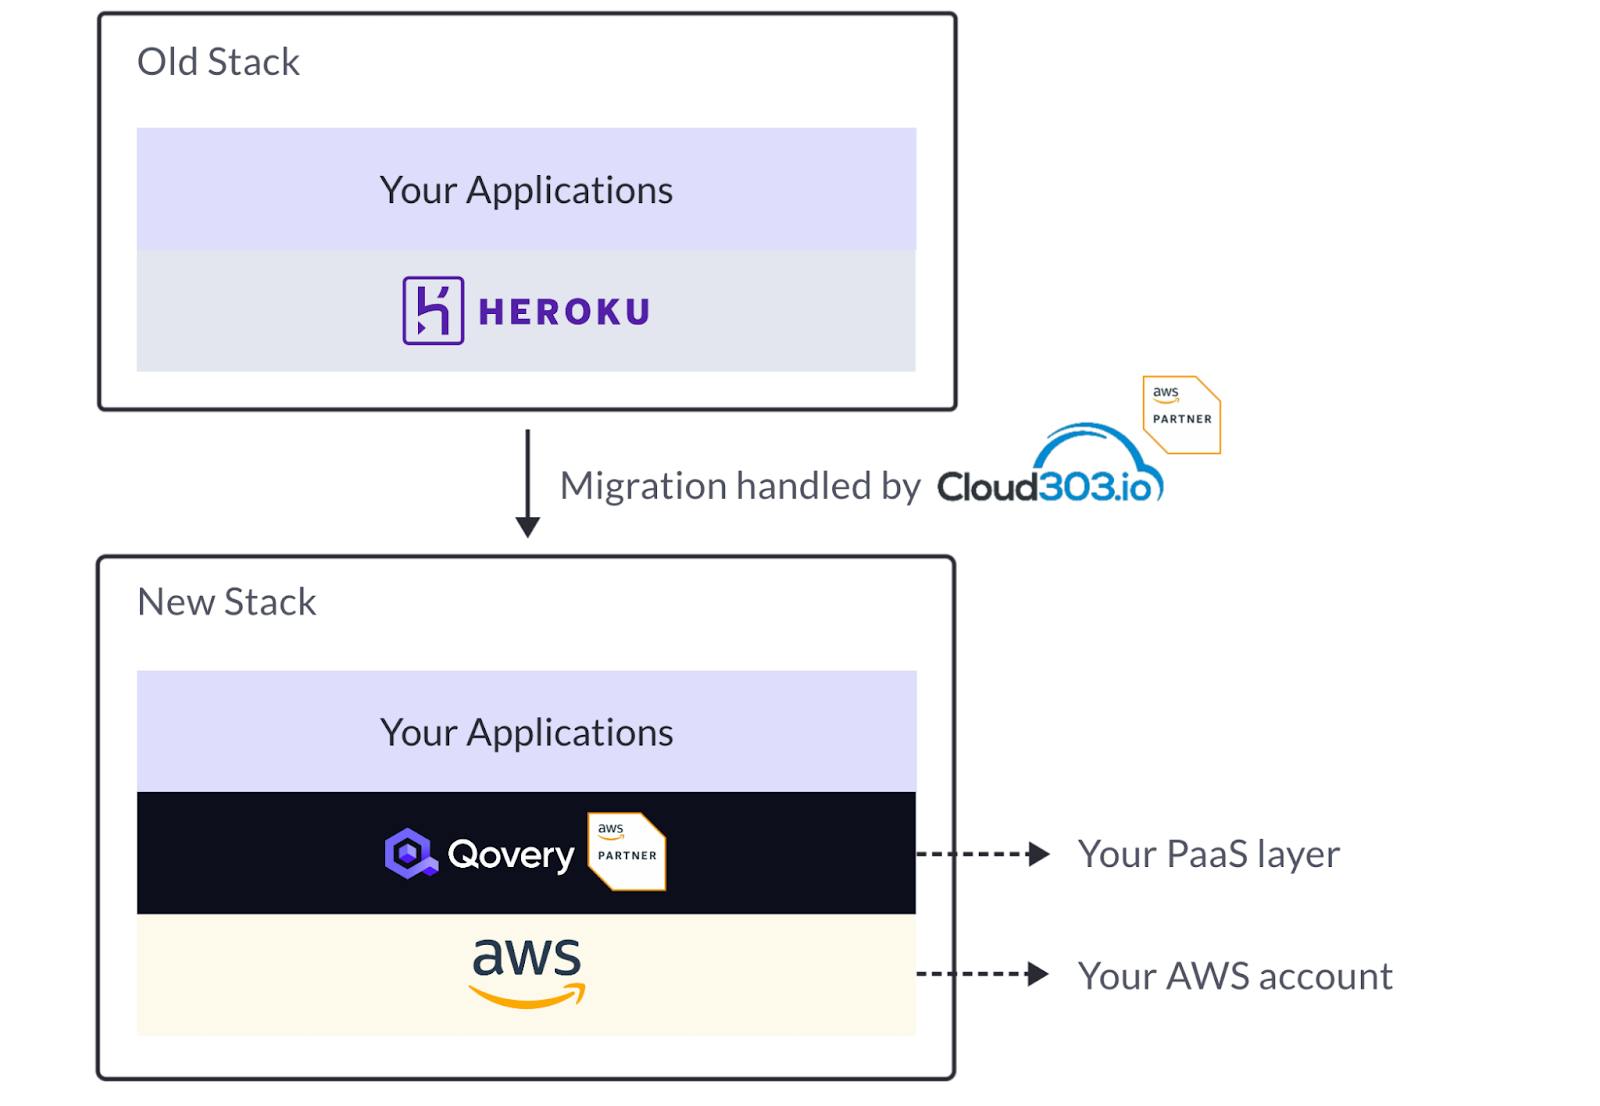 Old stack vs. New stack by partnering with Qovery and Cloud303